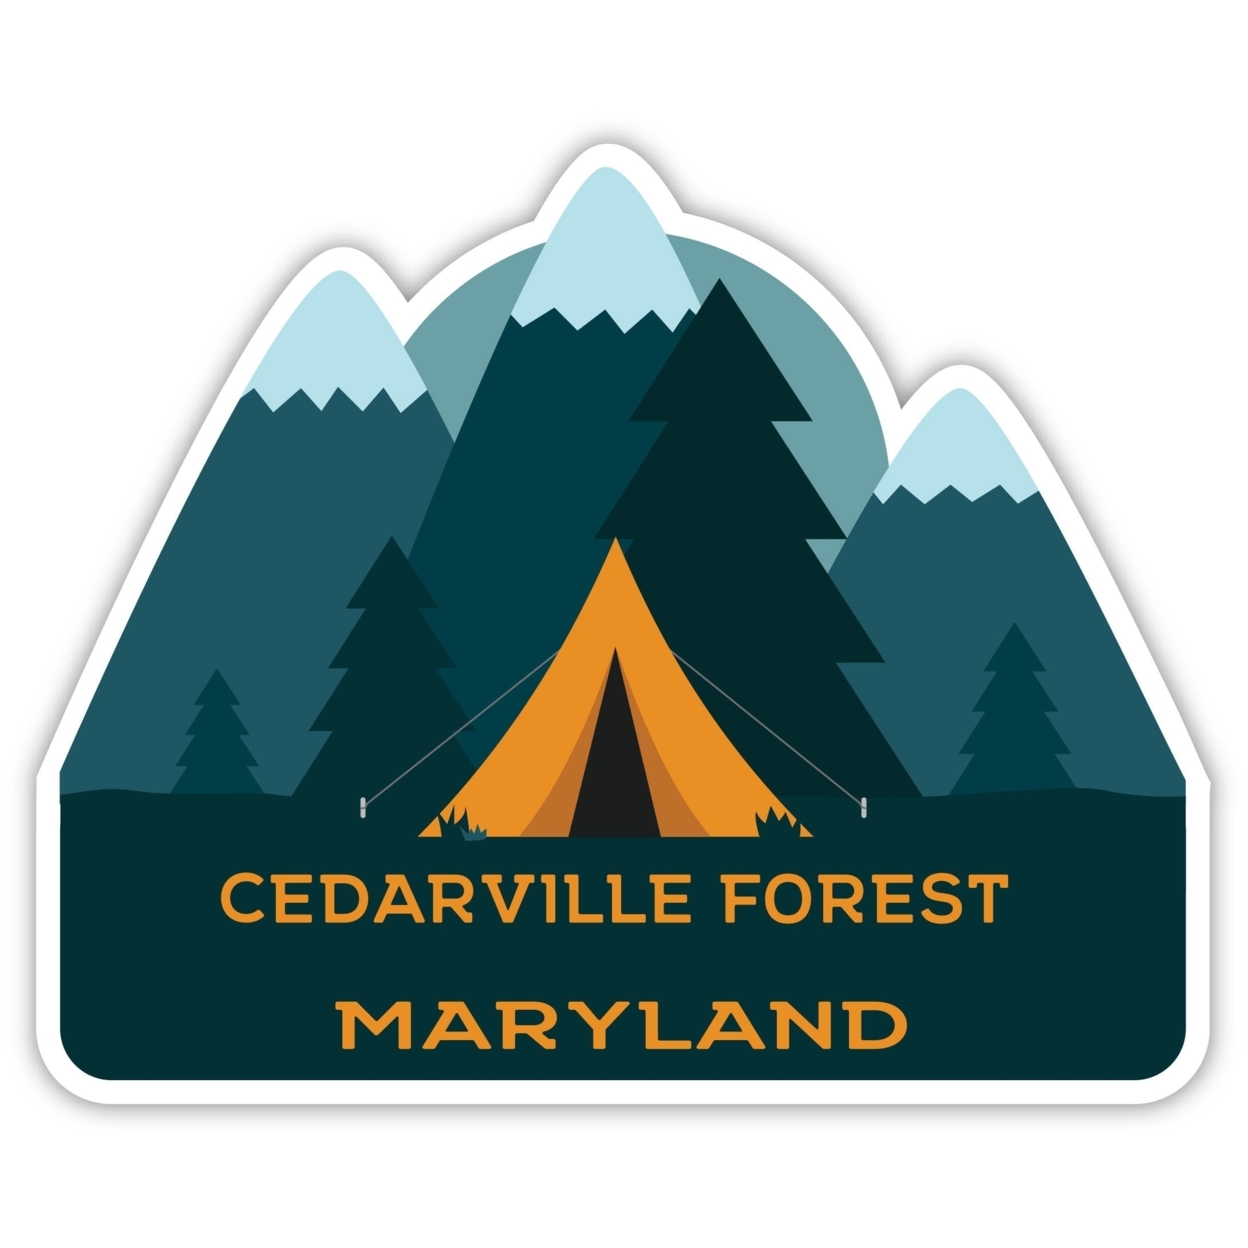 Cedarville Forest Maryland Souvenir Decorative Stickers (Choose Theme And Size) - 4-Pack, 6-Inch, Tent